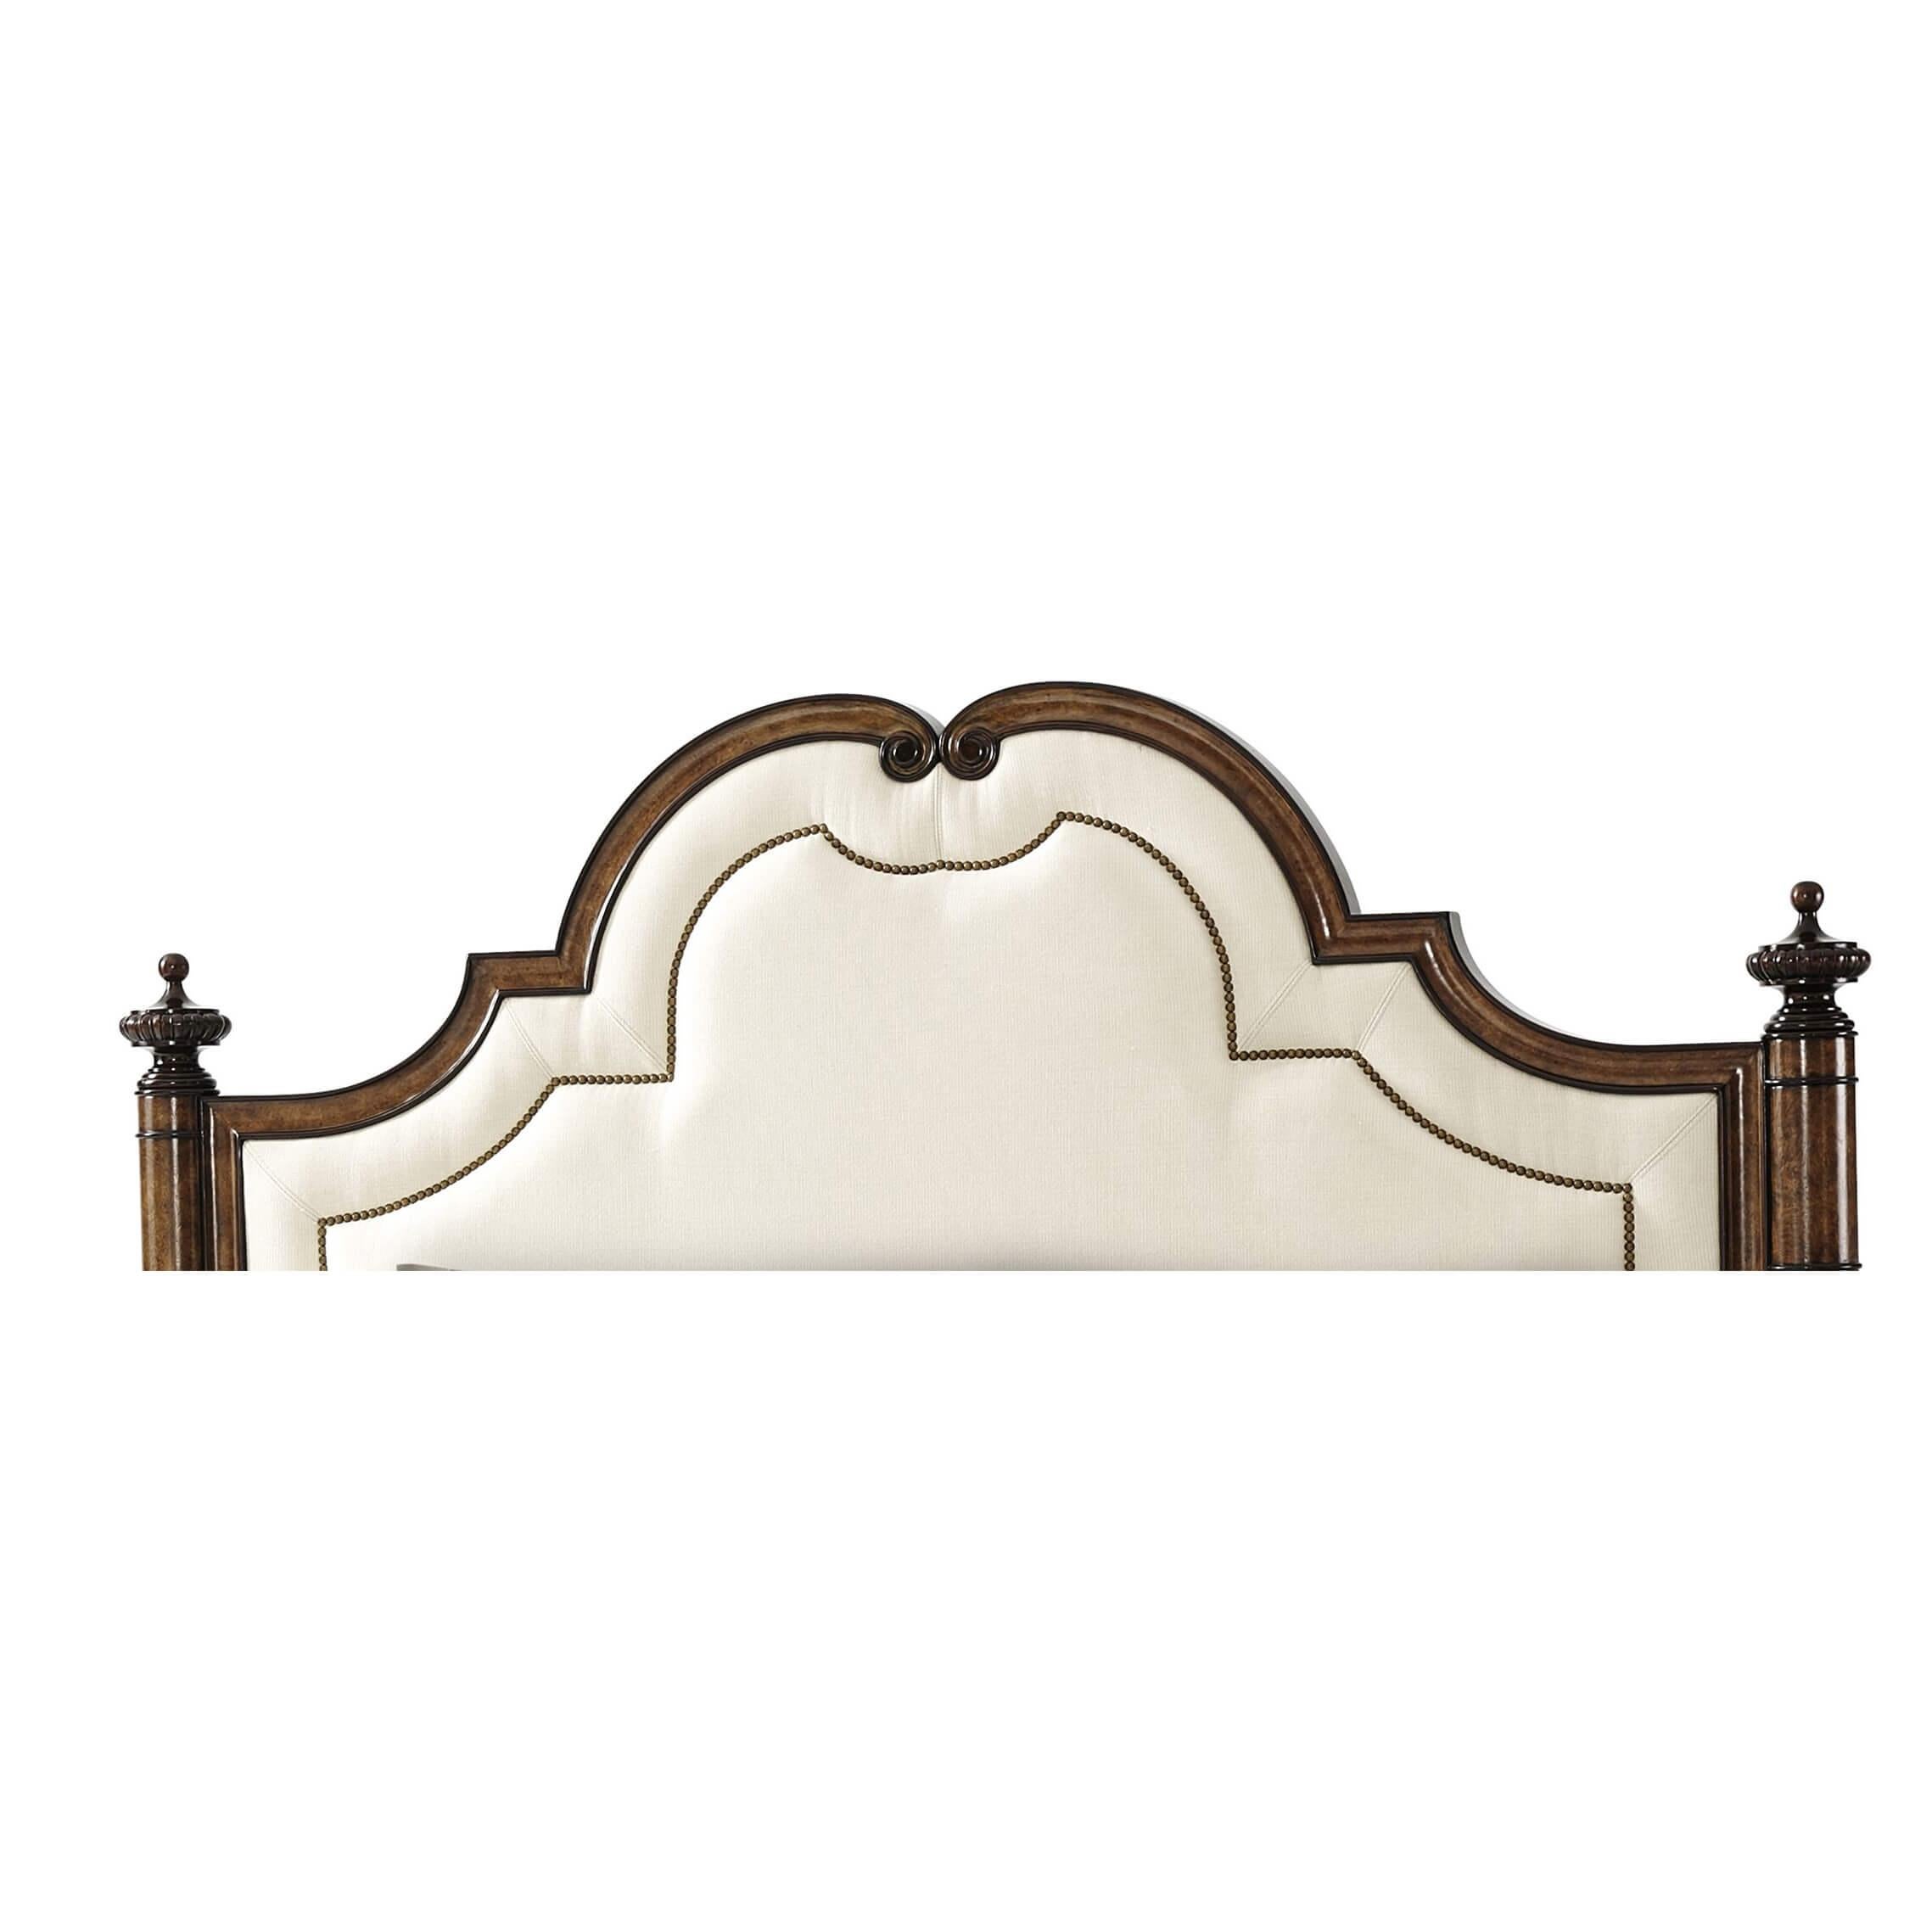 A chestnut burl and flame mahogany veneered bed, the shaped arched headboard with a concave molded frame enclosing a nail head decorated upholstered panel, flanked by ring turned and veneered columns with urn finials, with a similar scroll bracket